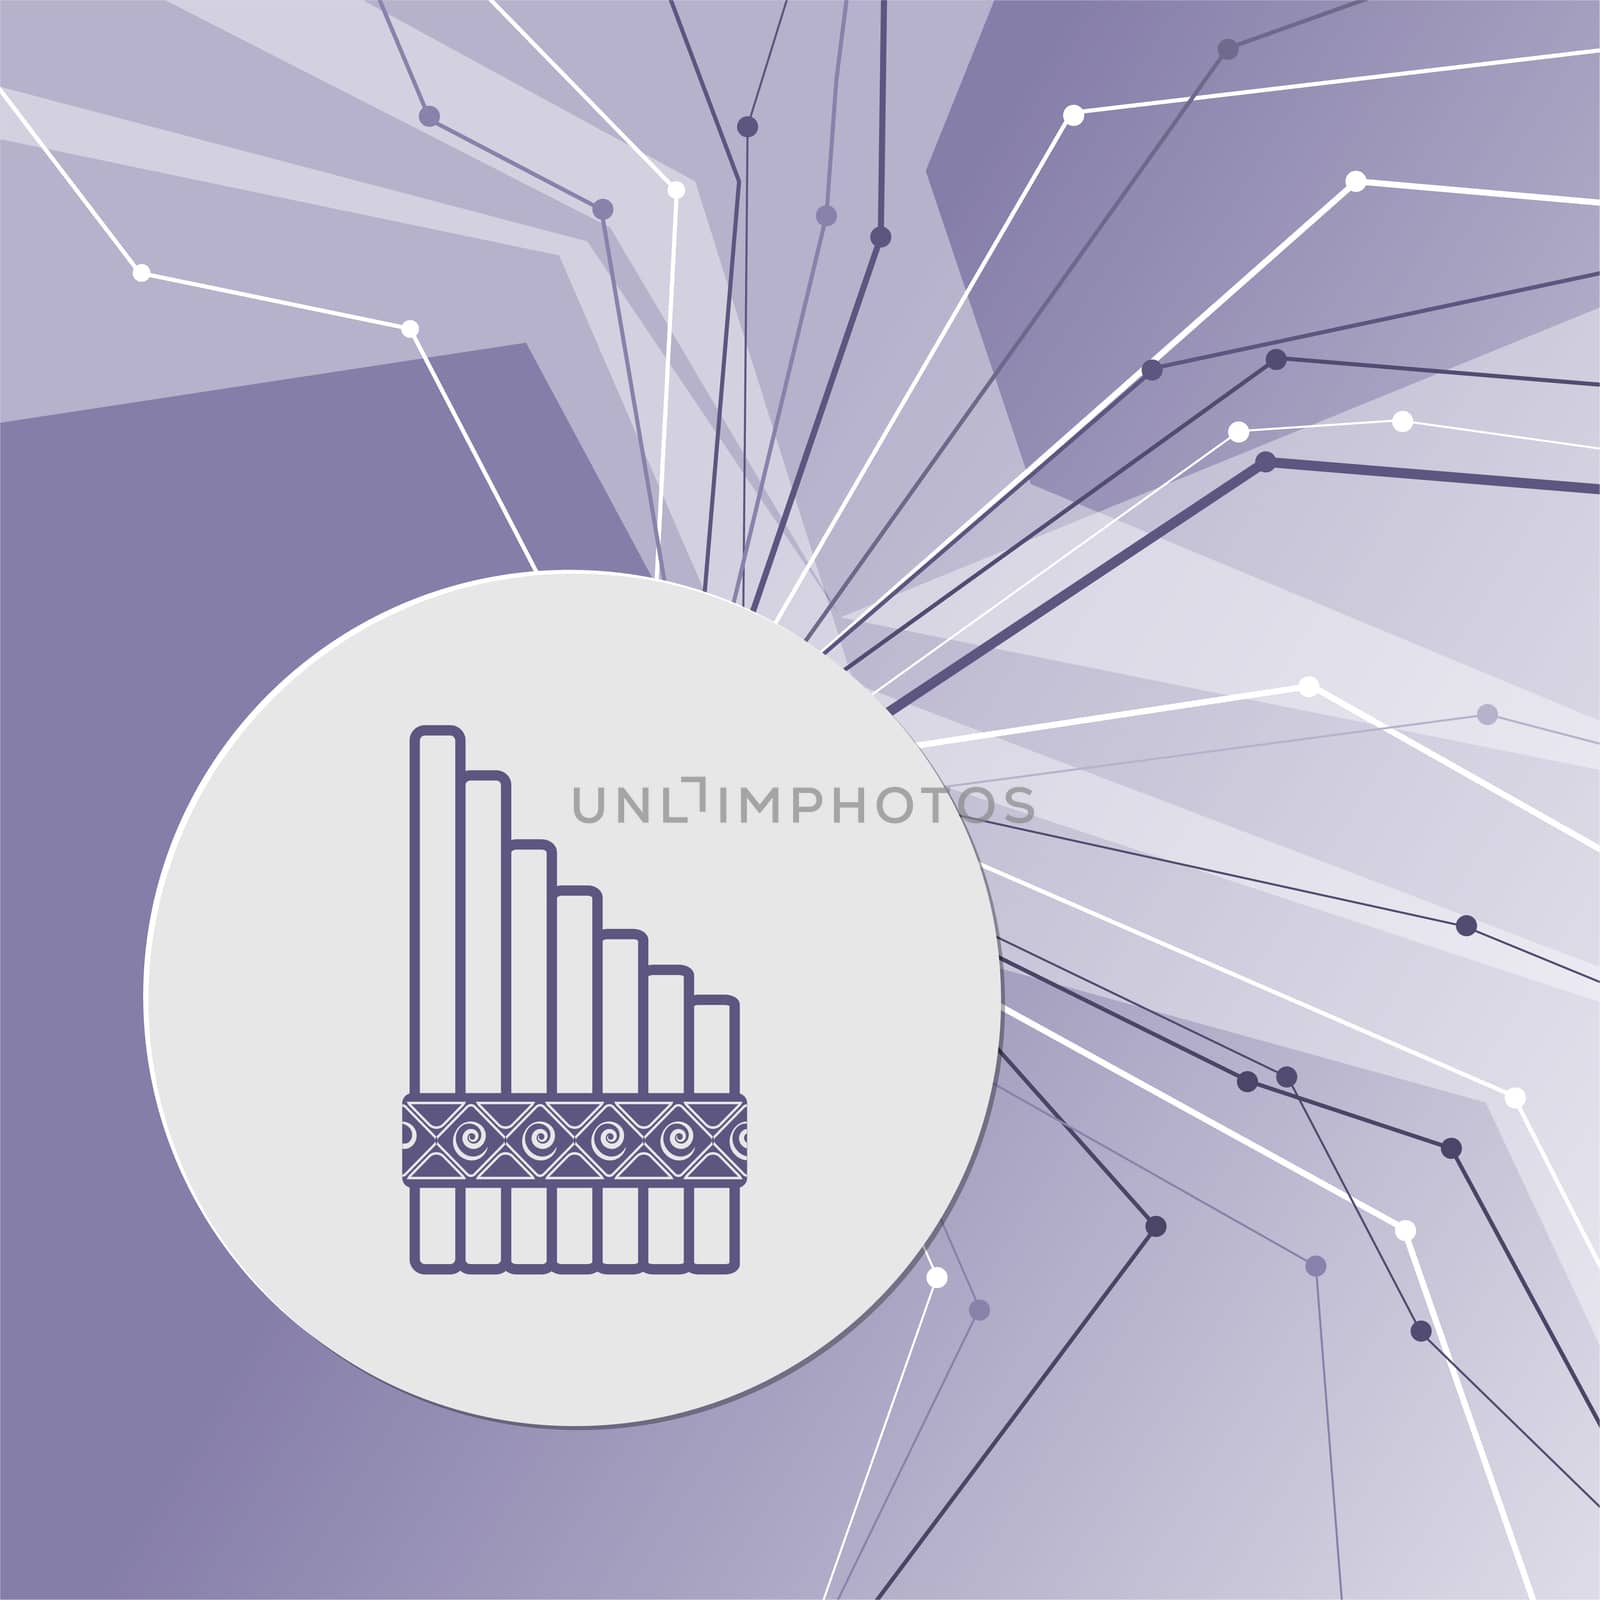 xylophone icon on purple abstract modern background. The lines in all directions. With room for your advertising. illustration